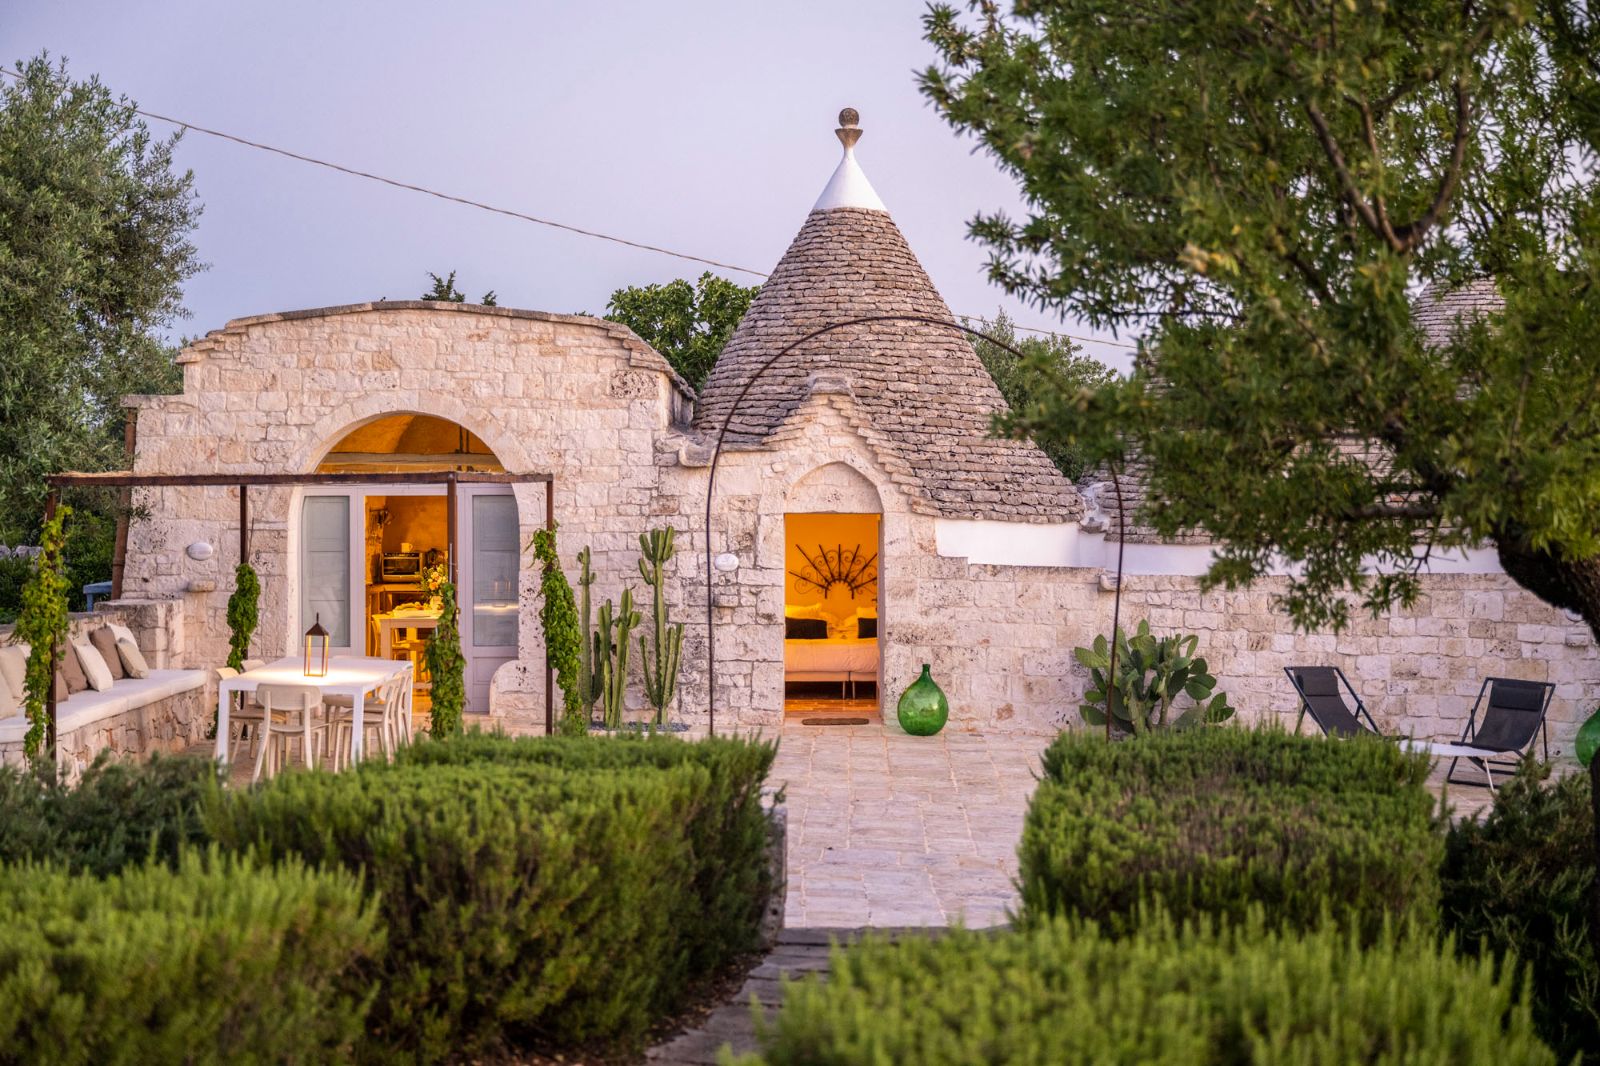 Exterior view of villa and patio with sun loungers, dining tables and chairs at Masseria Bianco in Puglia, Italy